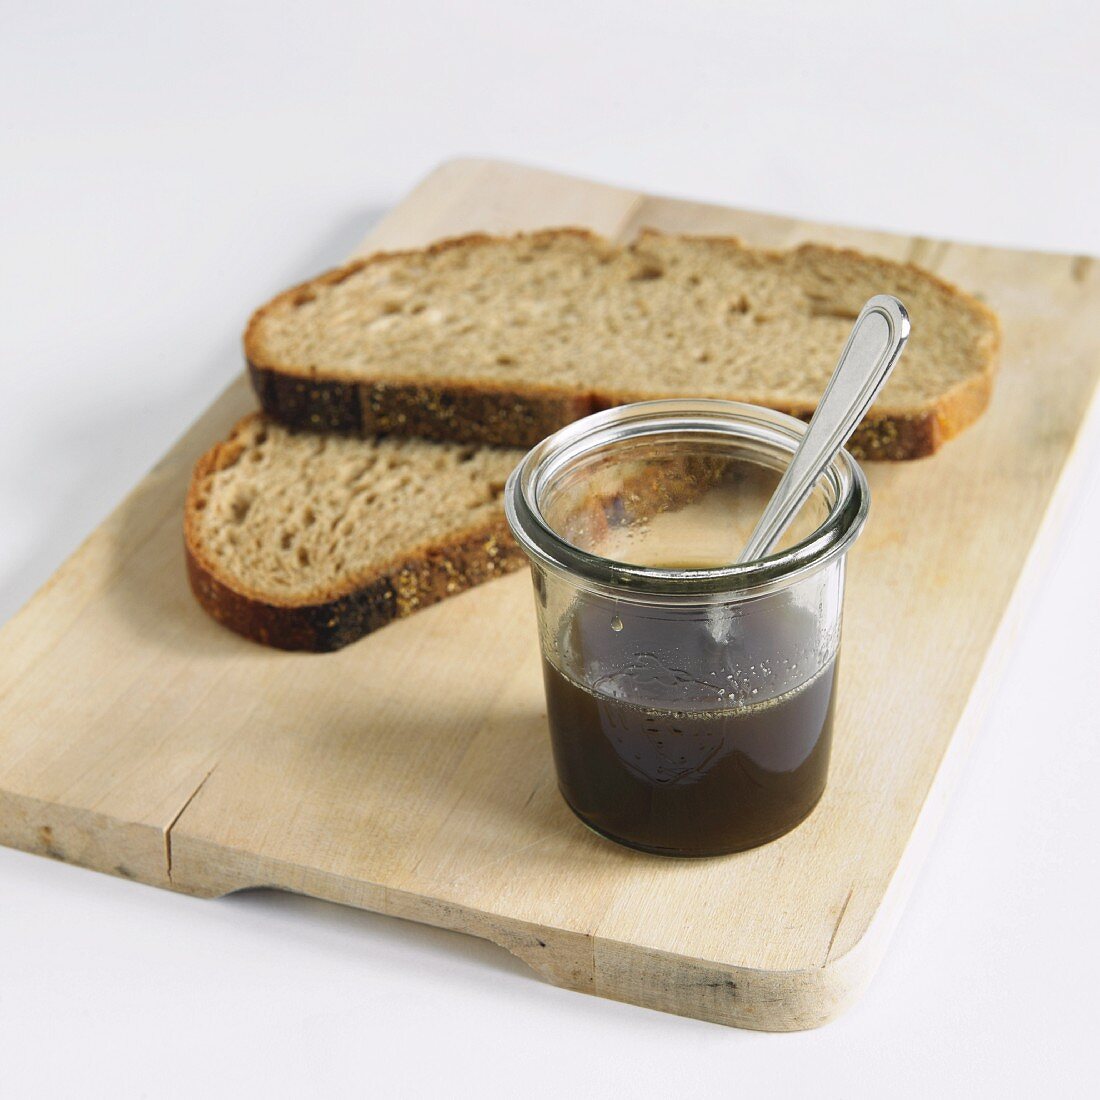 Sugar Beet Syrup with Slices of Bread on a Cutting Board